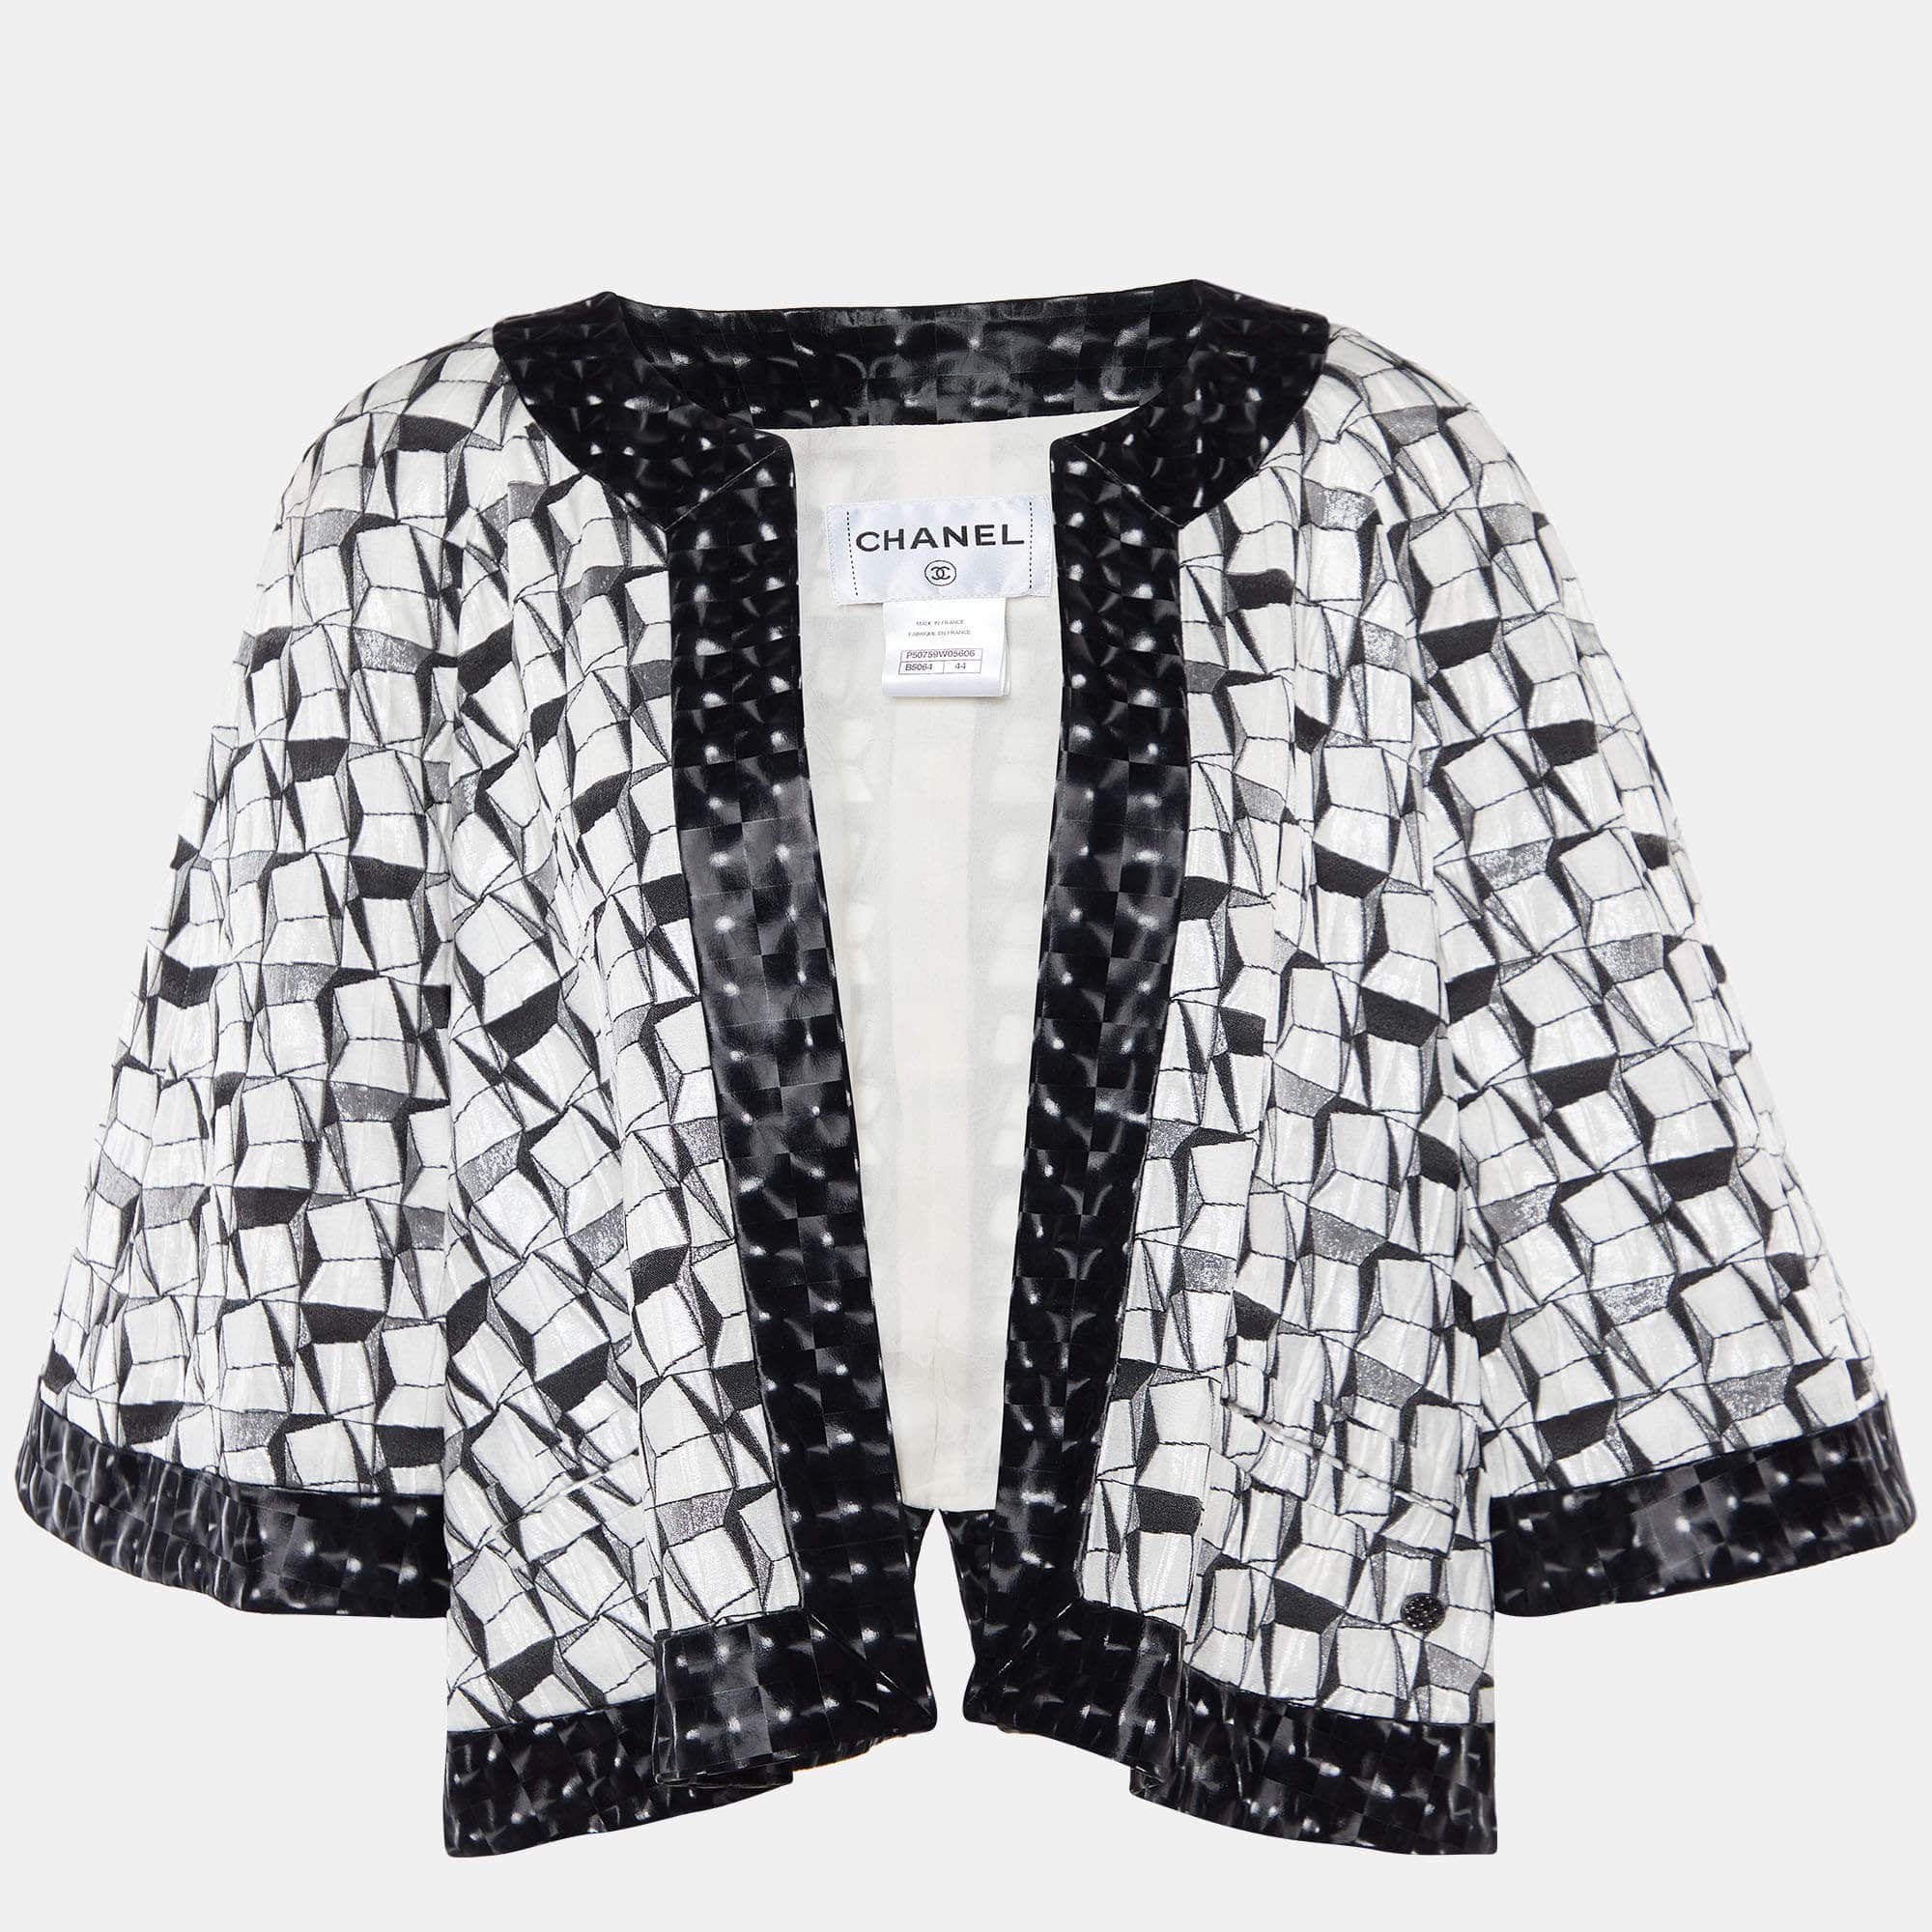 Chanel Chanel Black/White Patterned Jacquard Holographic Swing Jacket L ASCLC2413